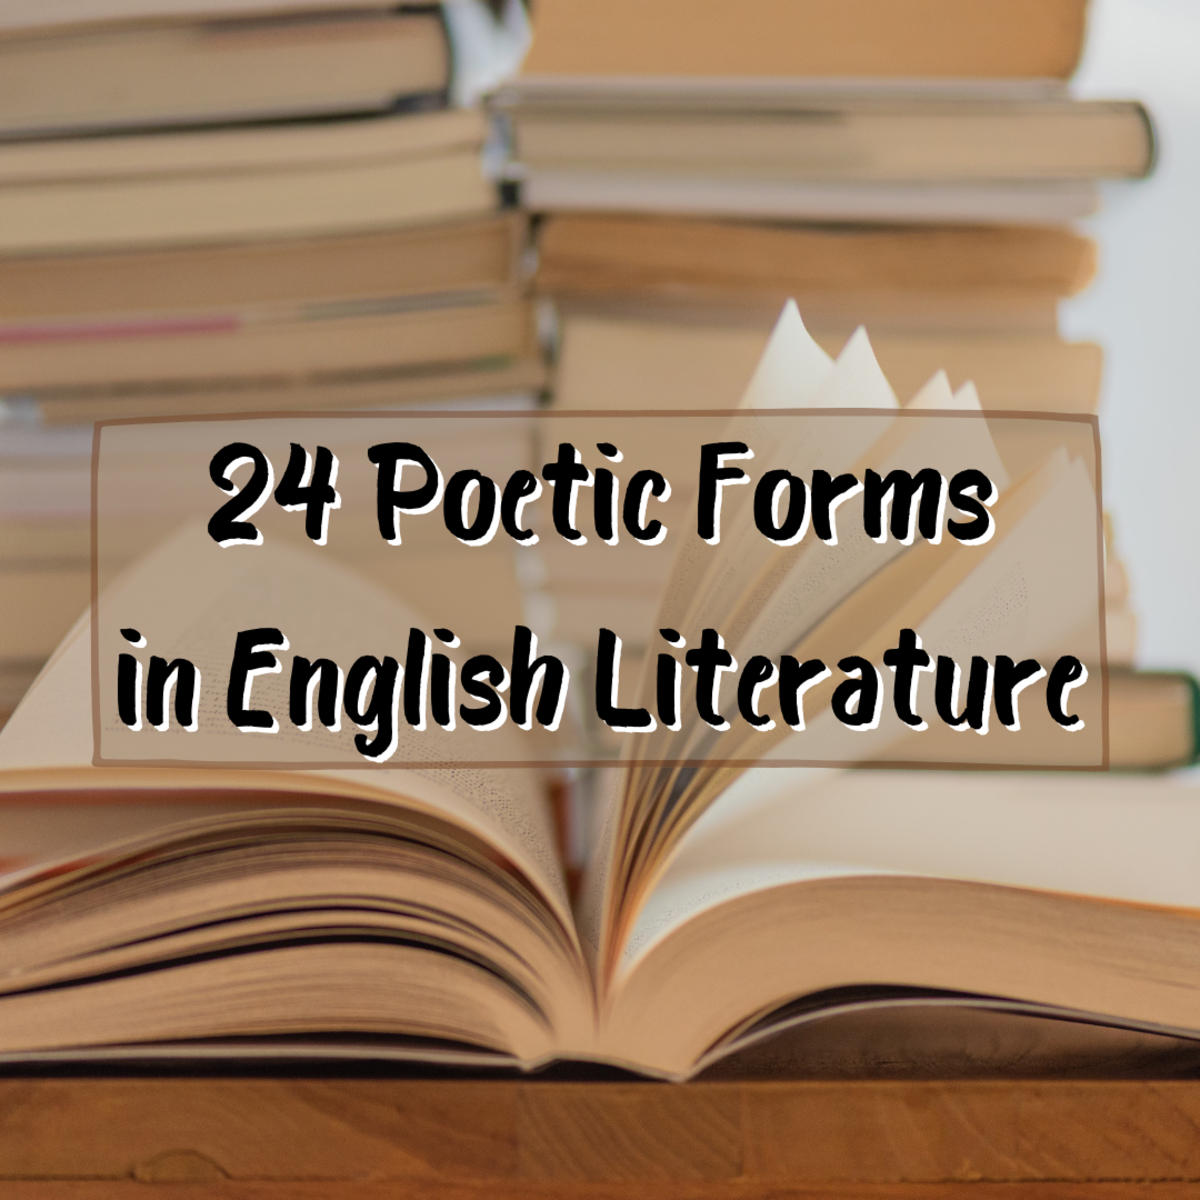 Read on to learn about the types of poetry in literature, including limericks, epigrams, idylls, and more.